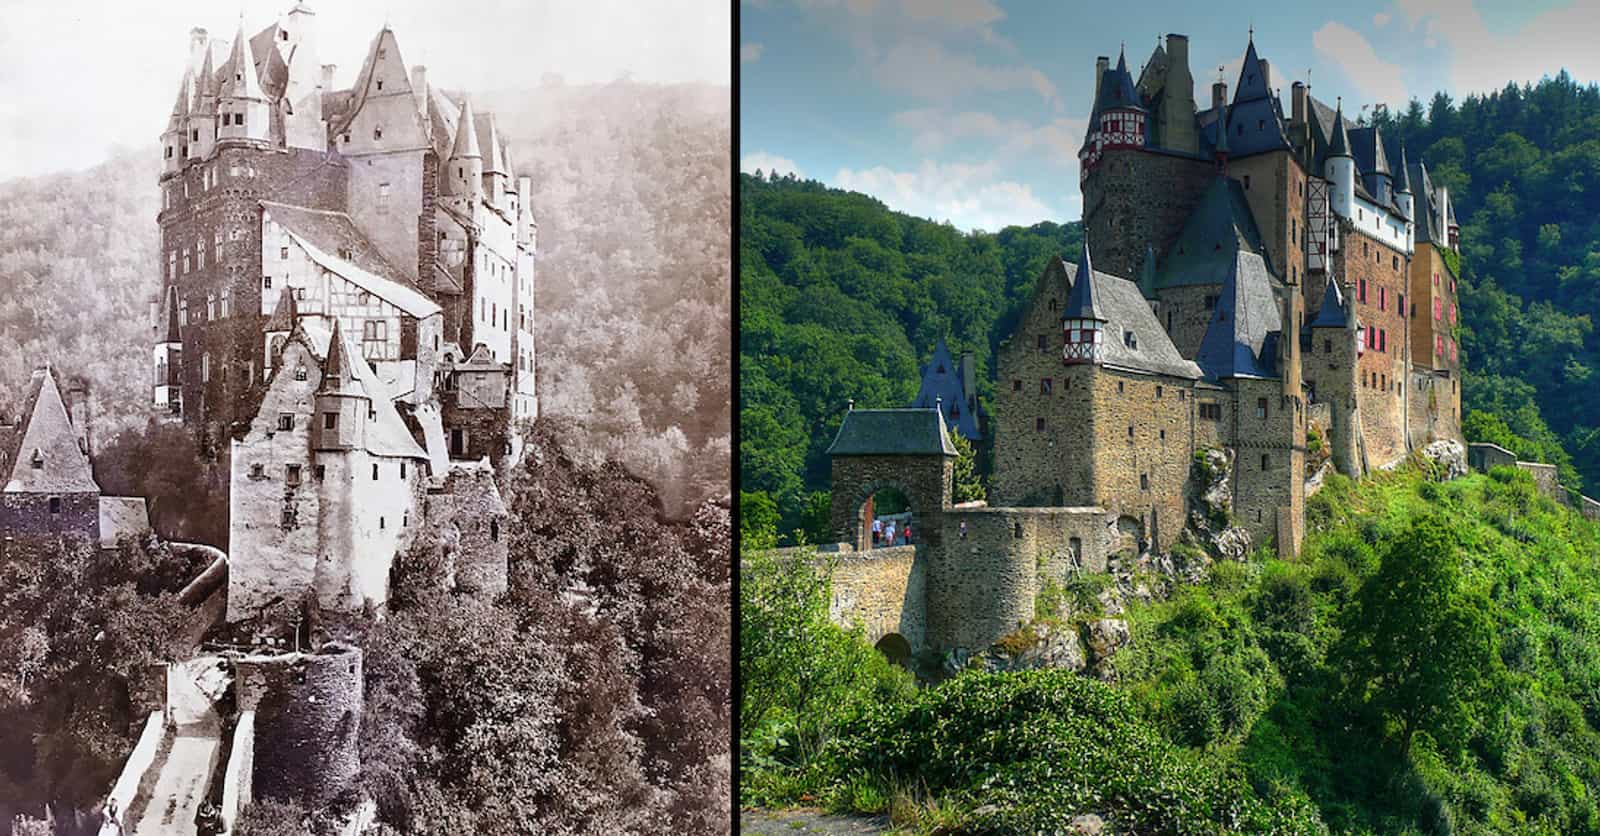 Historical Photos Of Famous Castles Vs. What They Look Like Today